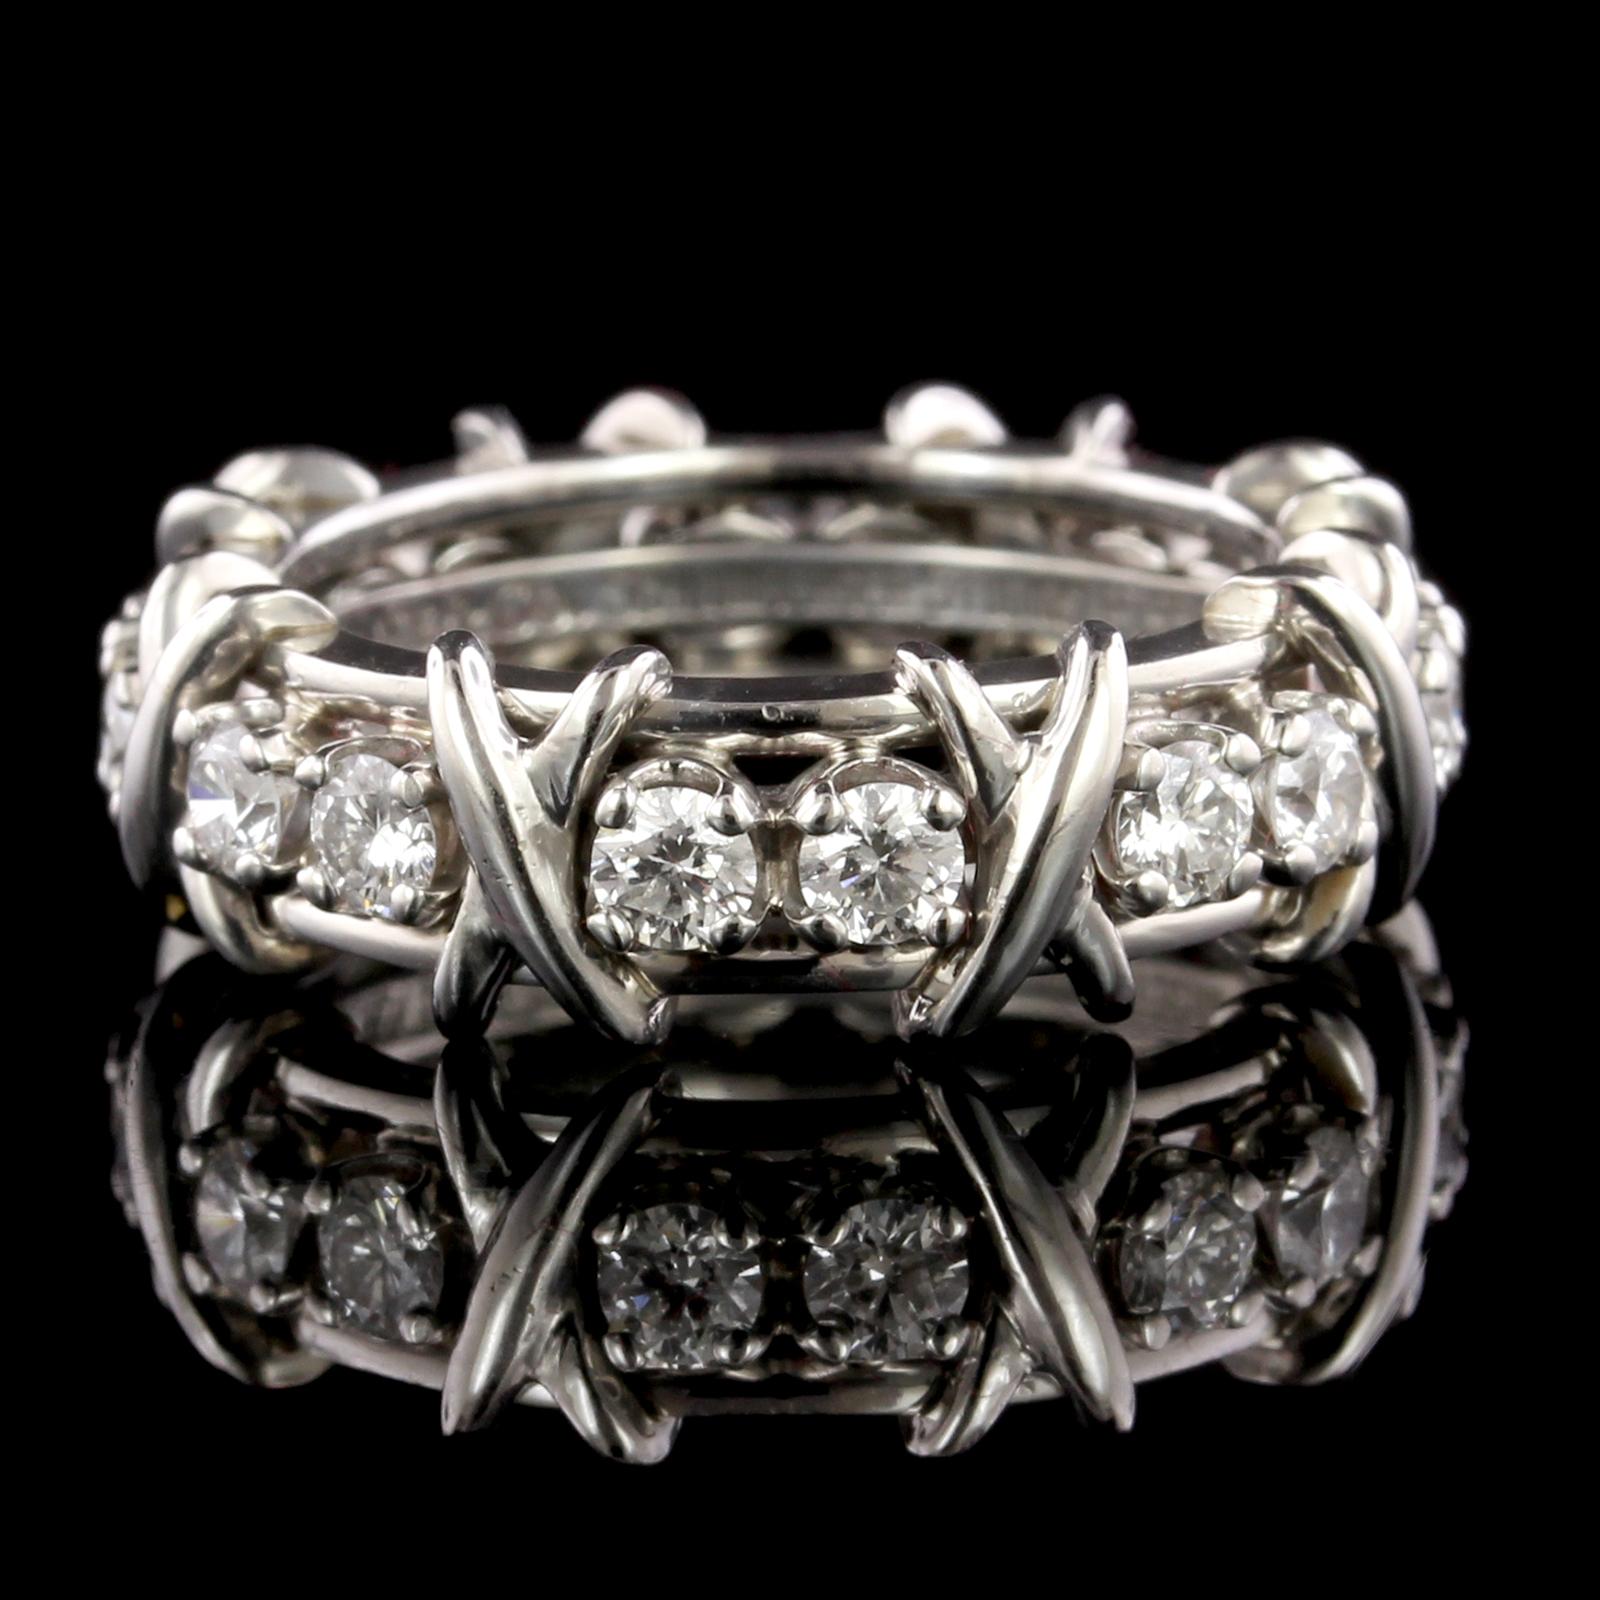 Tiffany & Co. Platinum Schlumberger Band Ring. The band is prong set with 16
round brilliant diamonds, approx. total wt. 1.14cts., F color, VS clarity, size 6 1/4.
 